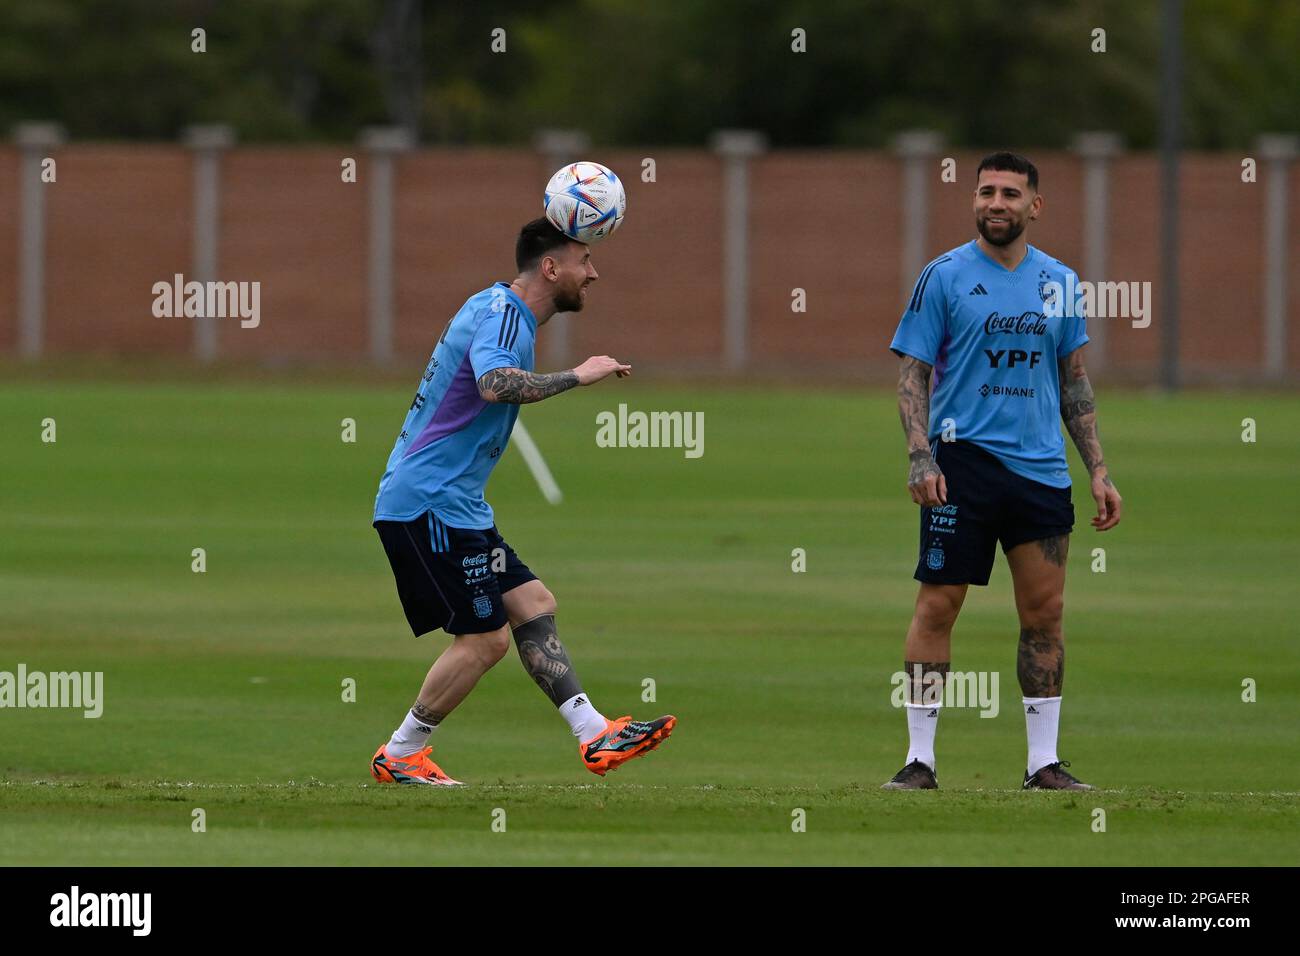 ARGENTINA, Buenos Aires, Ezeiza- 21 March 2023: Lionel Messi and Nicolas Otamendi of Argentina during the training session at AFA training ground before friendly match vs Panama. Photo by Diego Halisz/SFSI Stock Photo